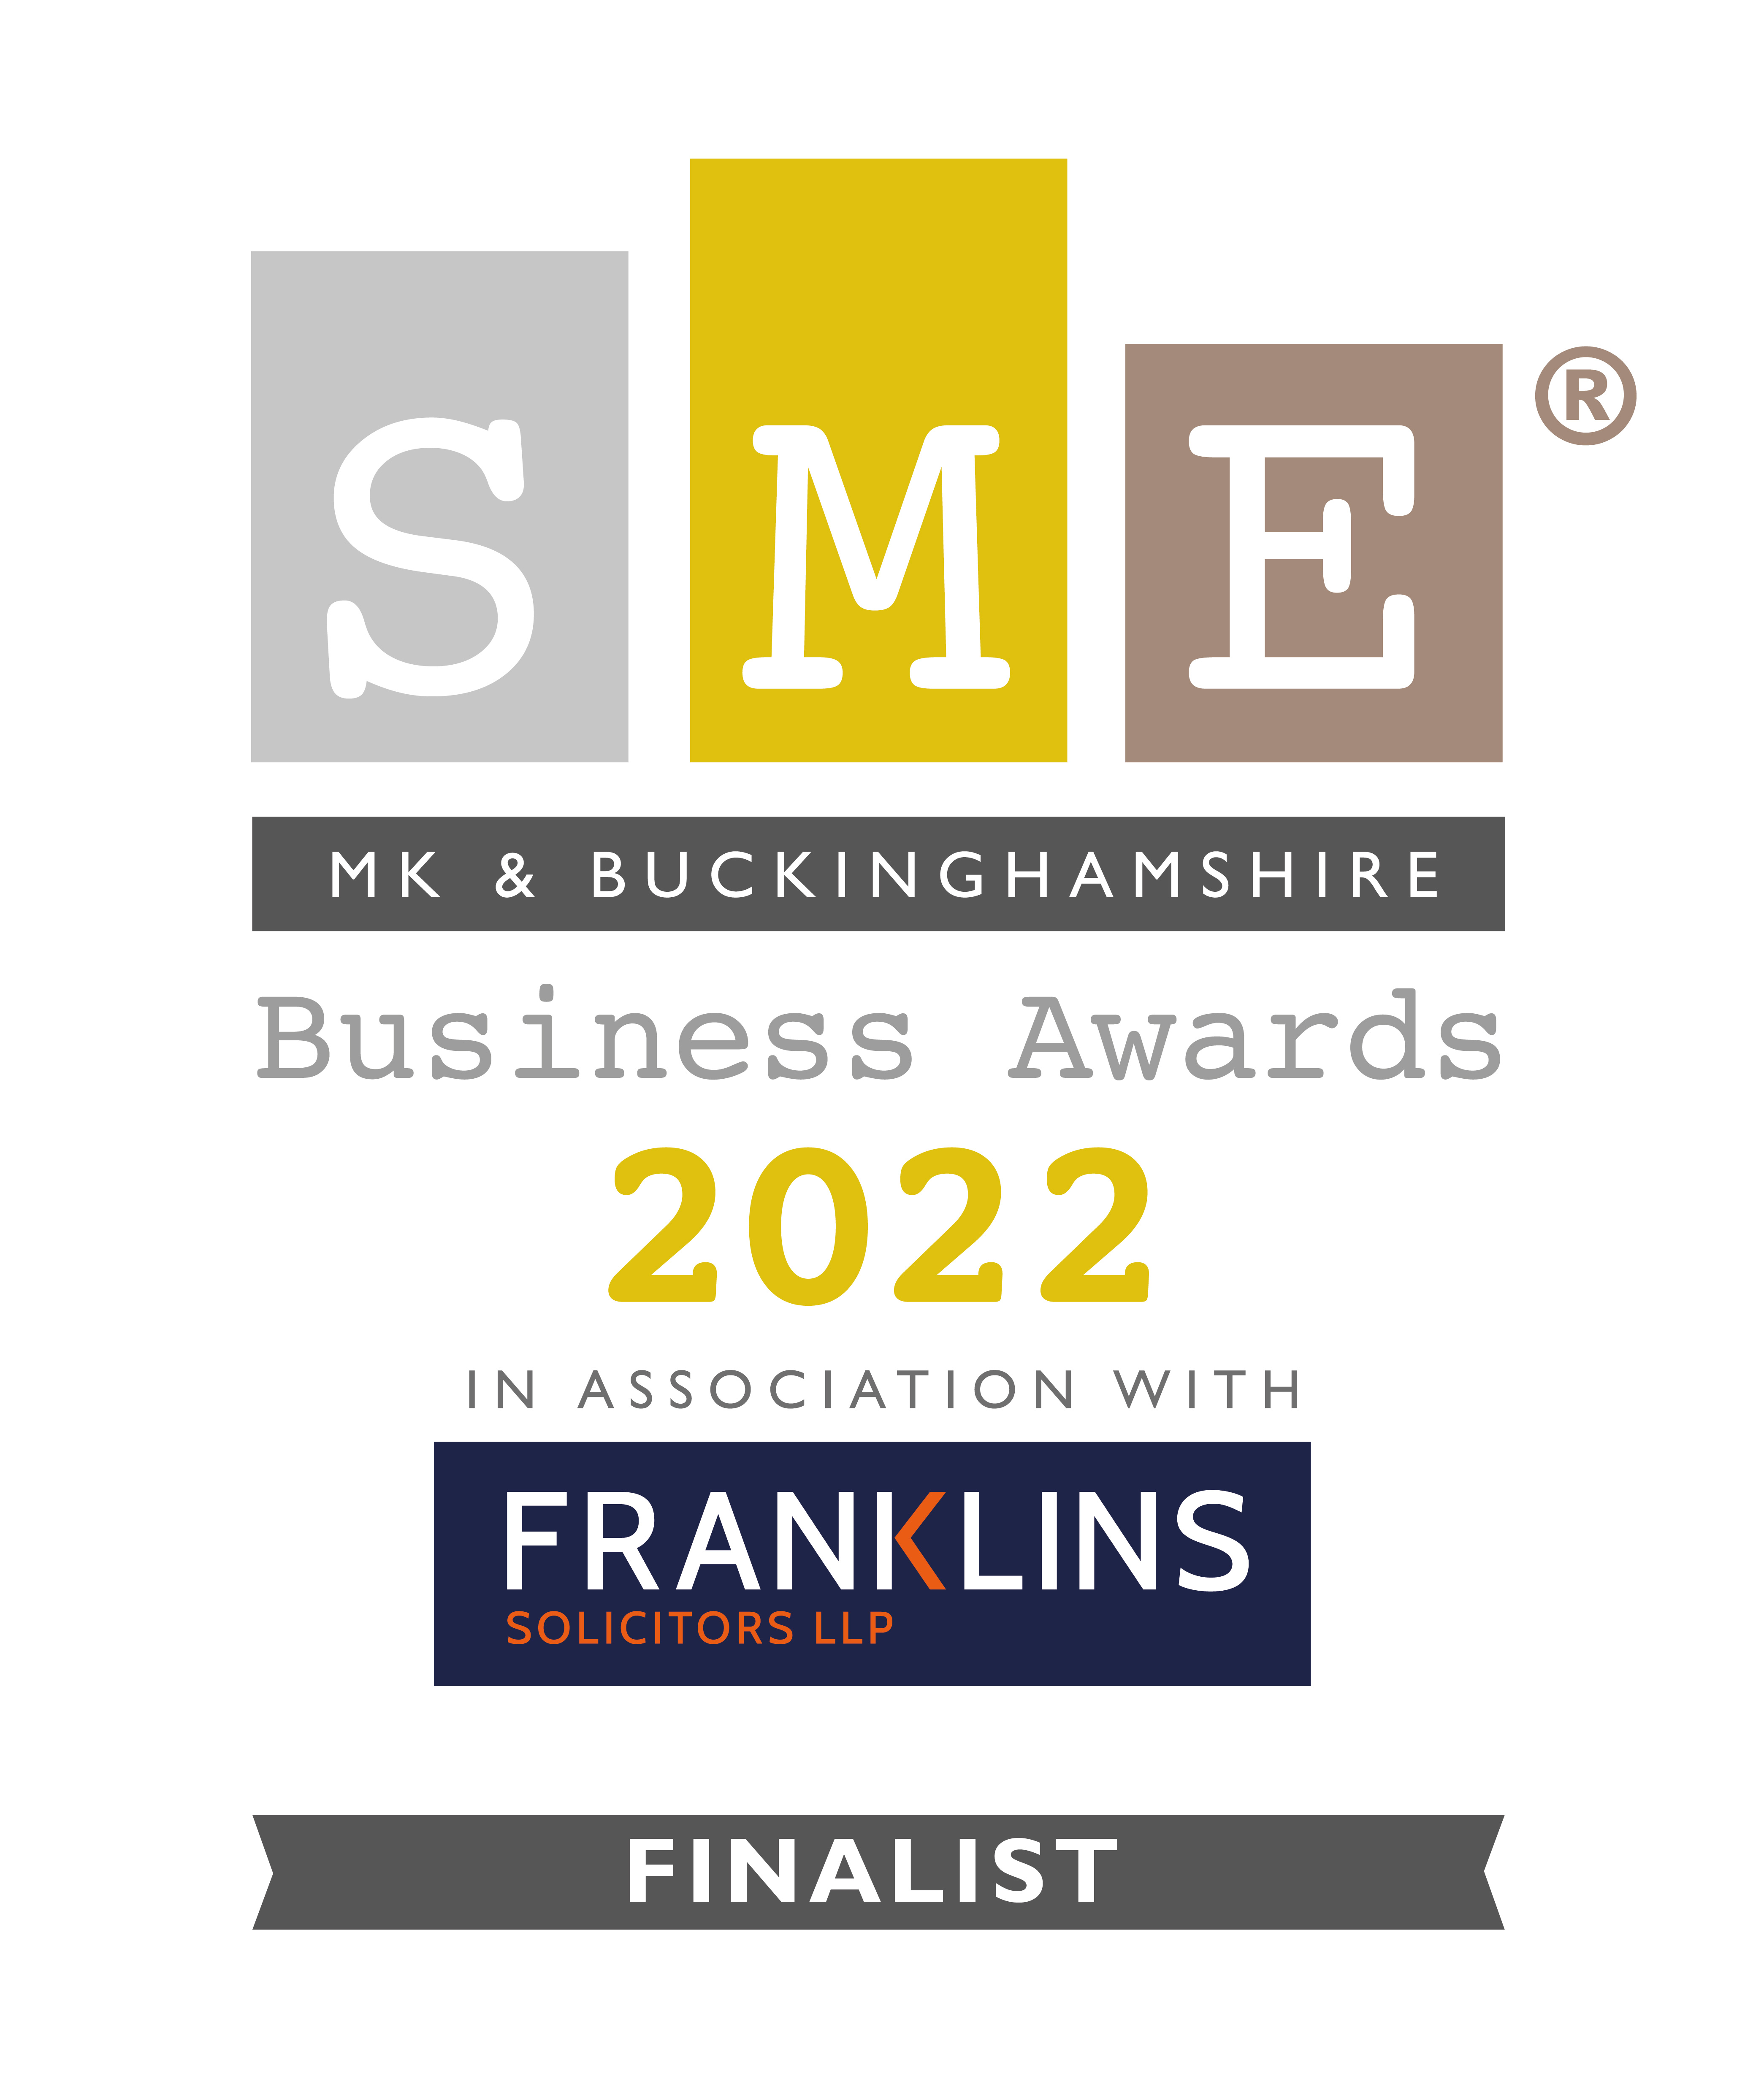 Bluecube Shortlisted For Three SME Business Awards 2022